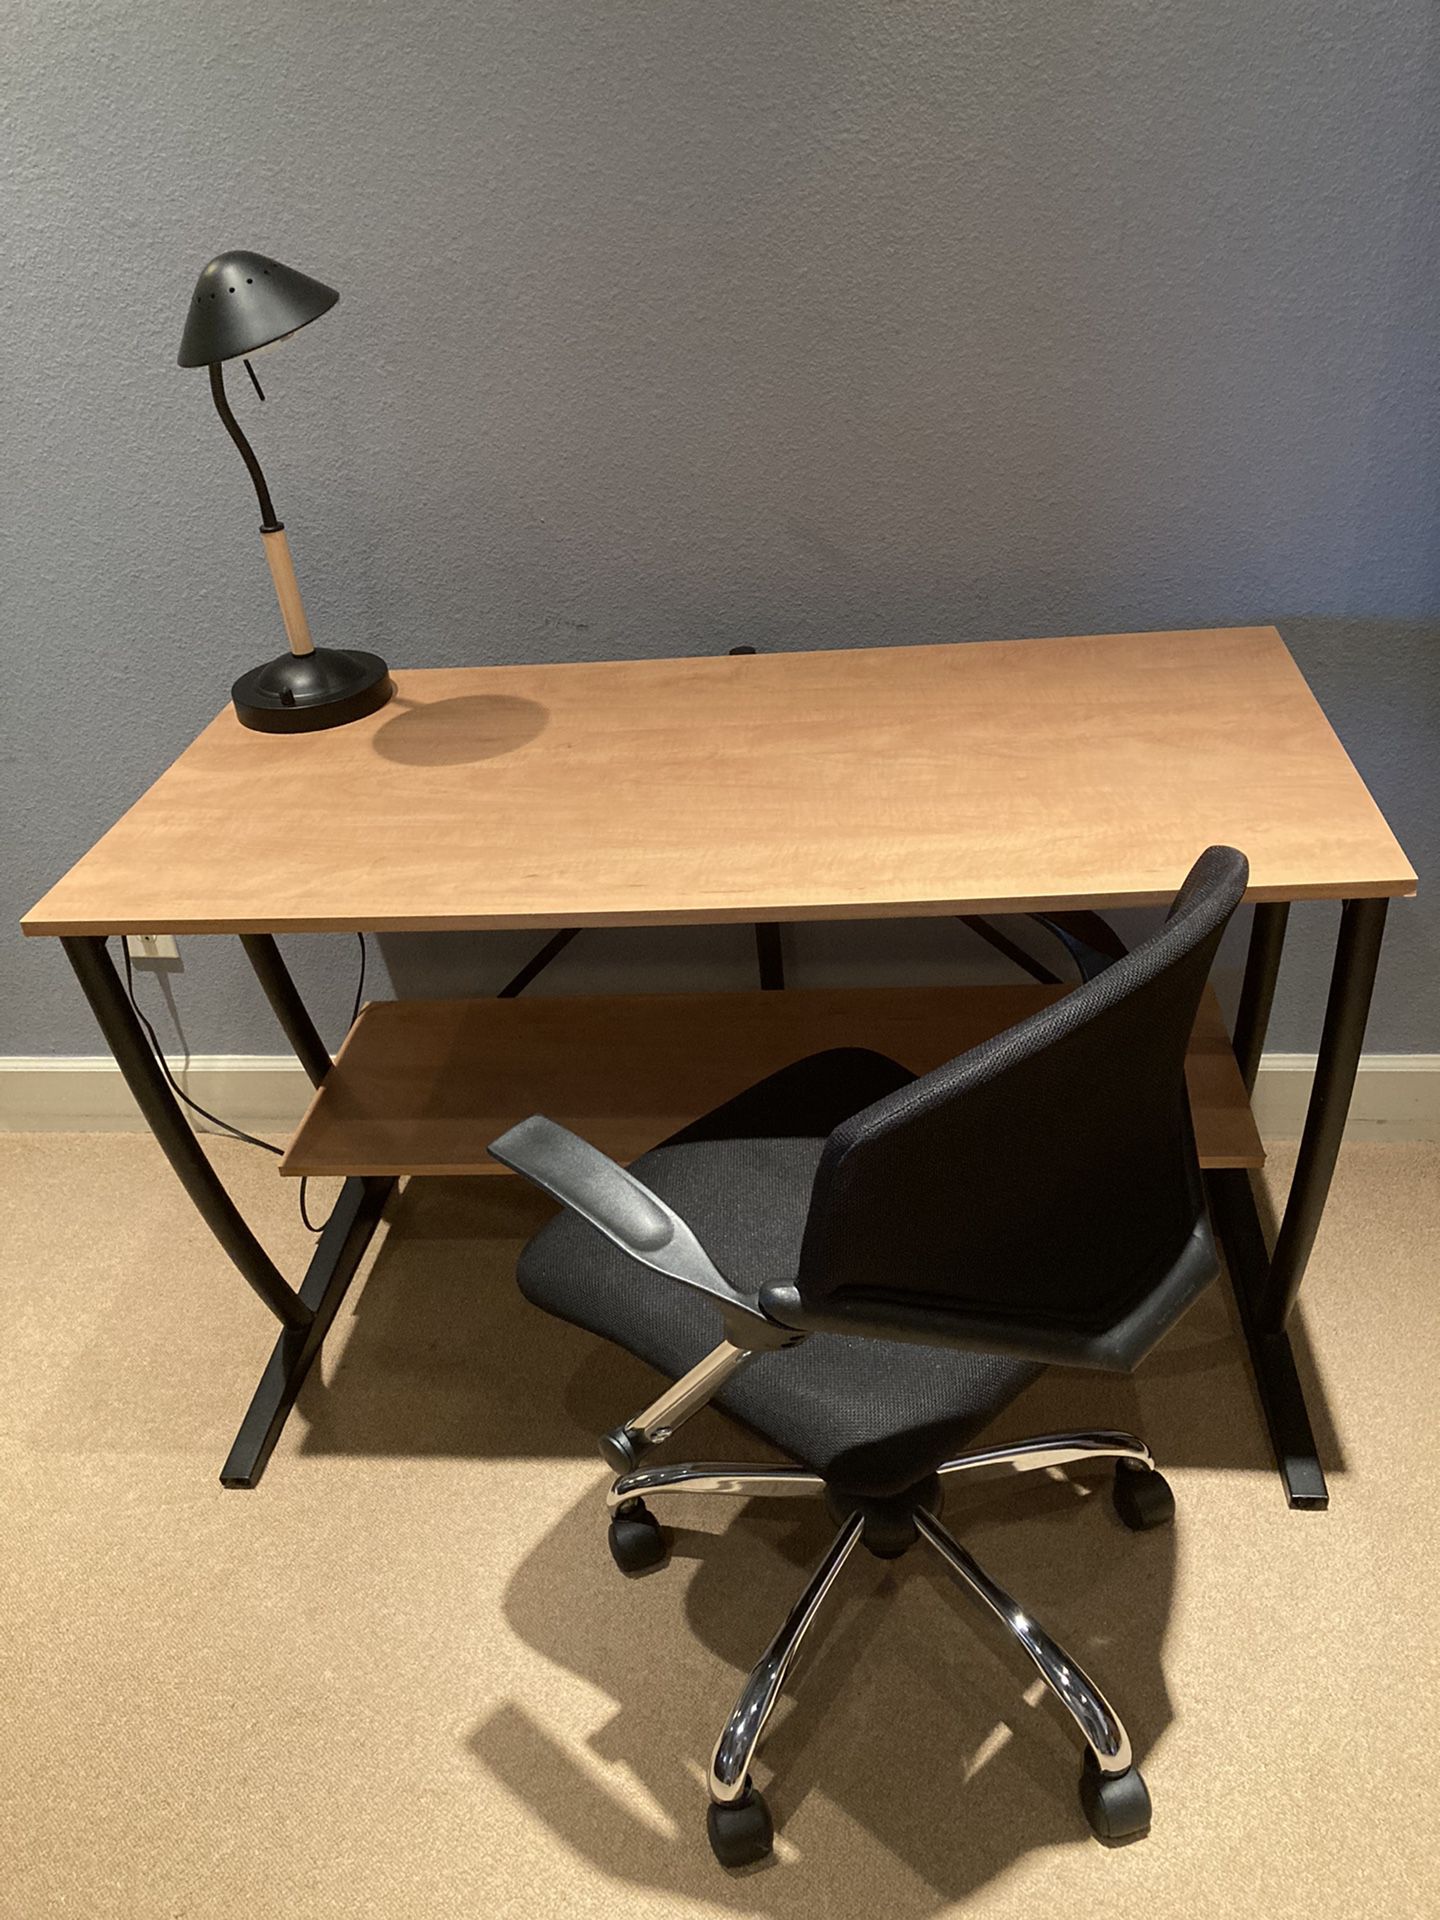 Desk, Pneumatic Chair and Lamp.